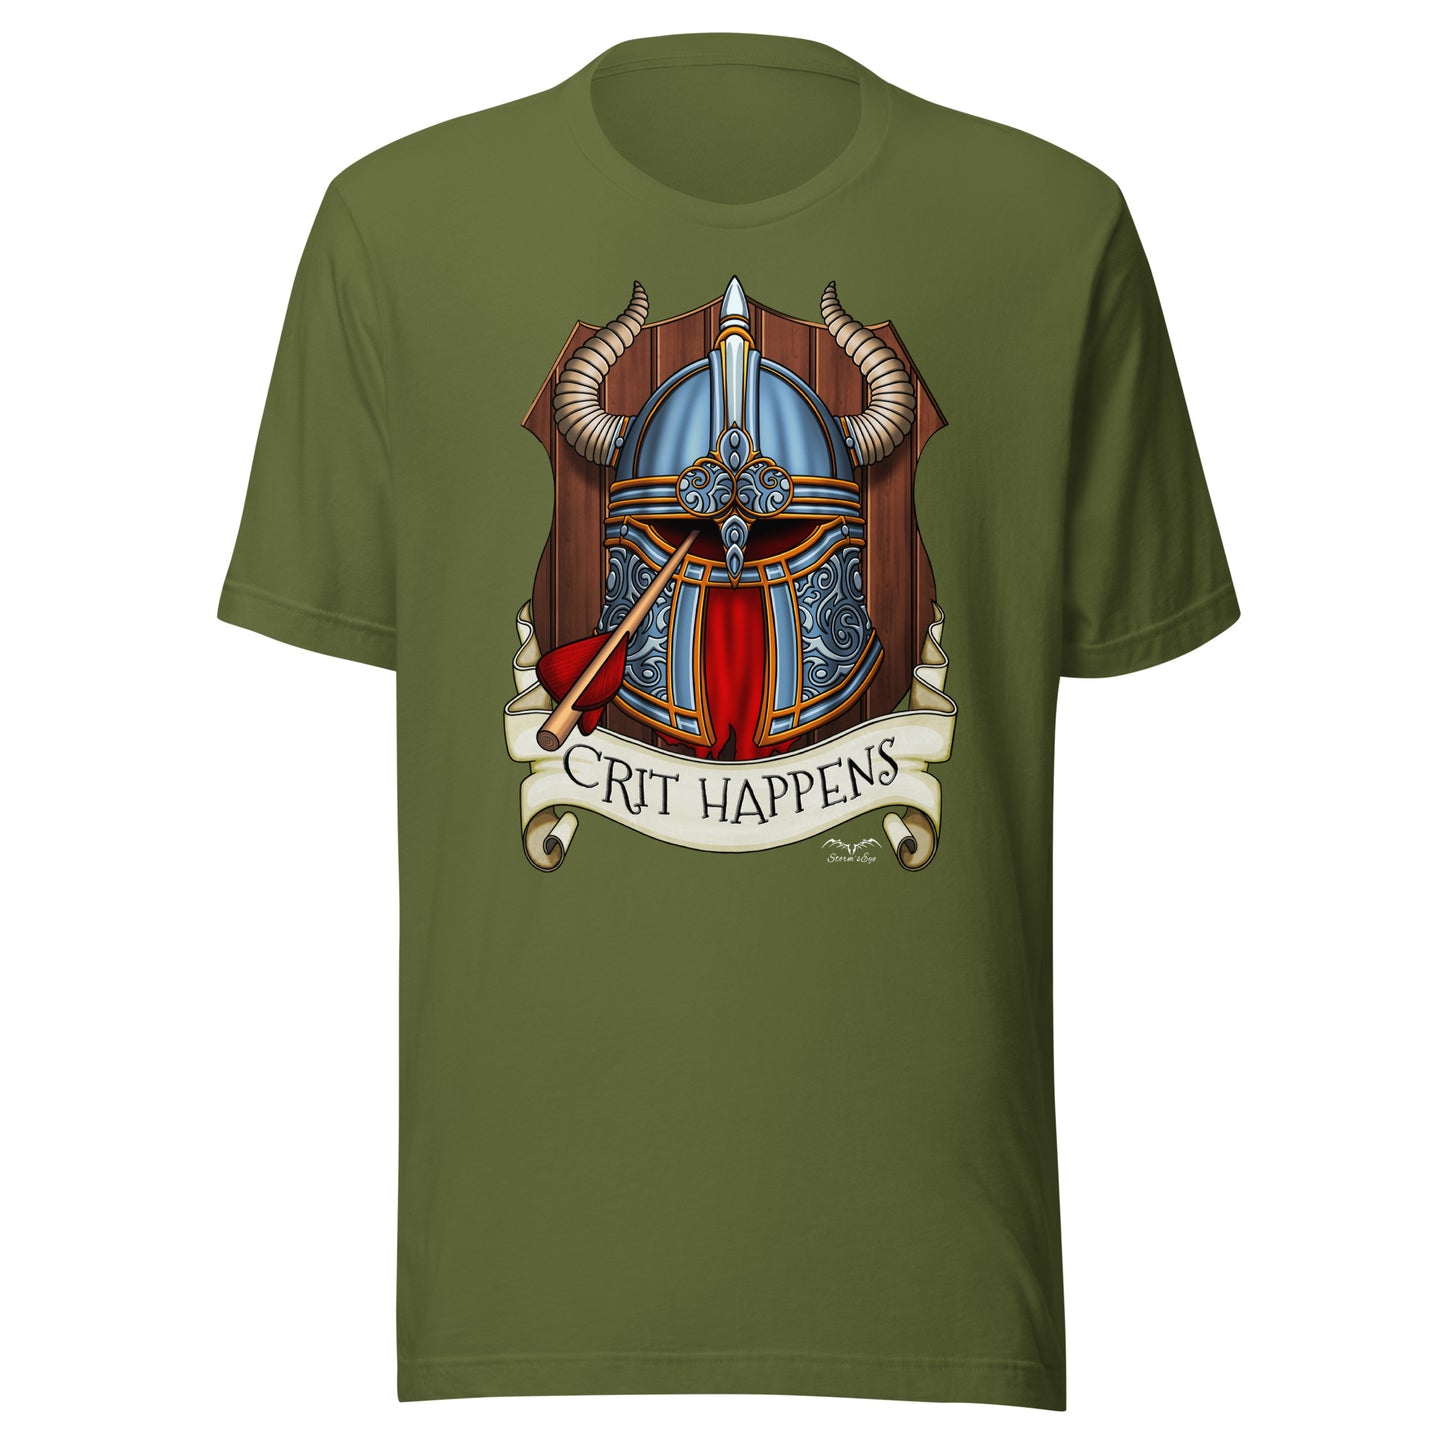 crit happens DnD t-shirt olive green by stormseye design